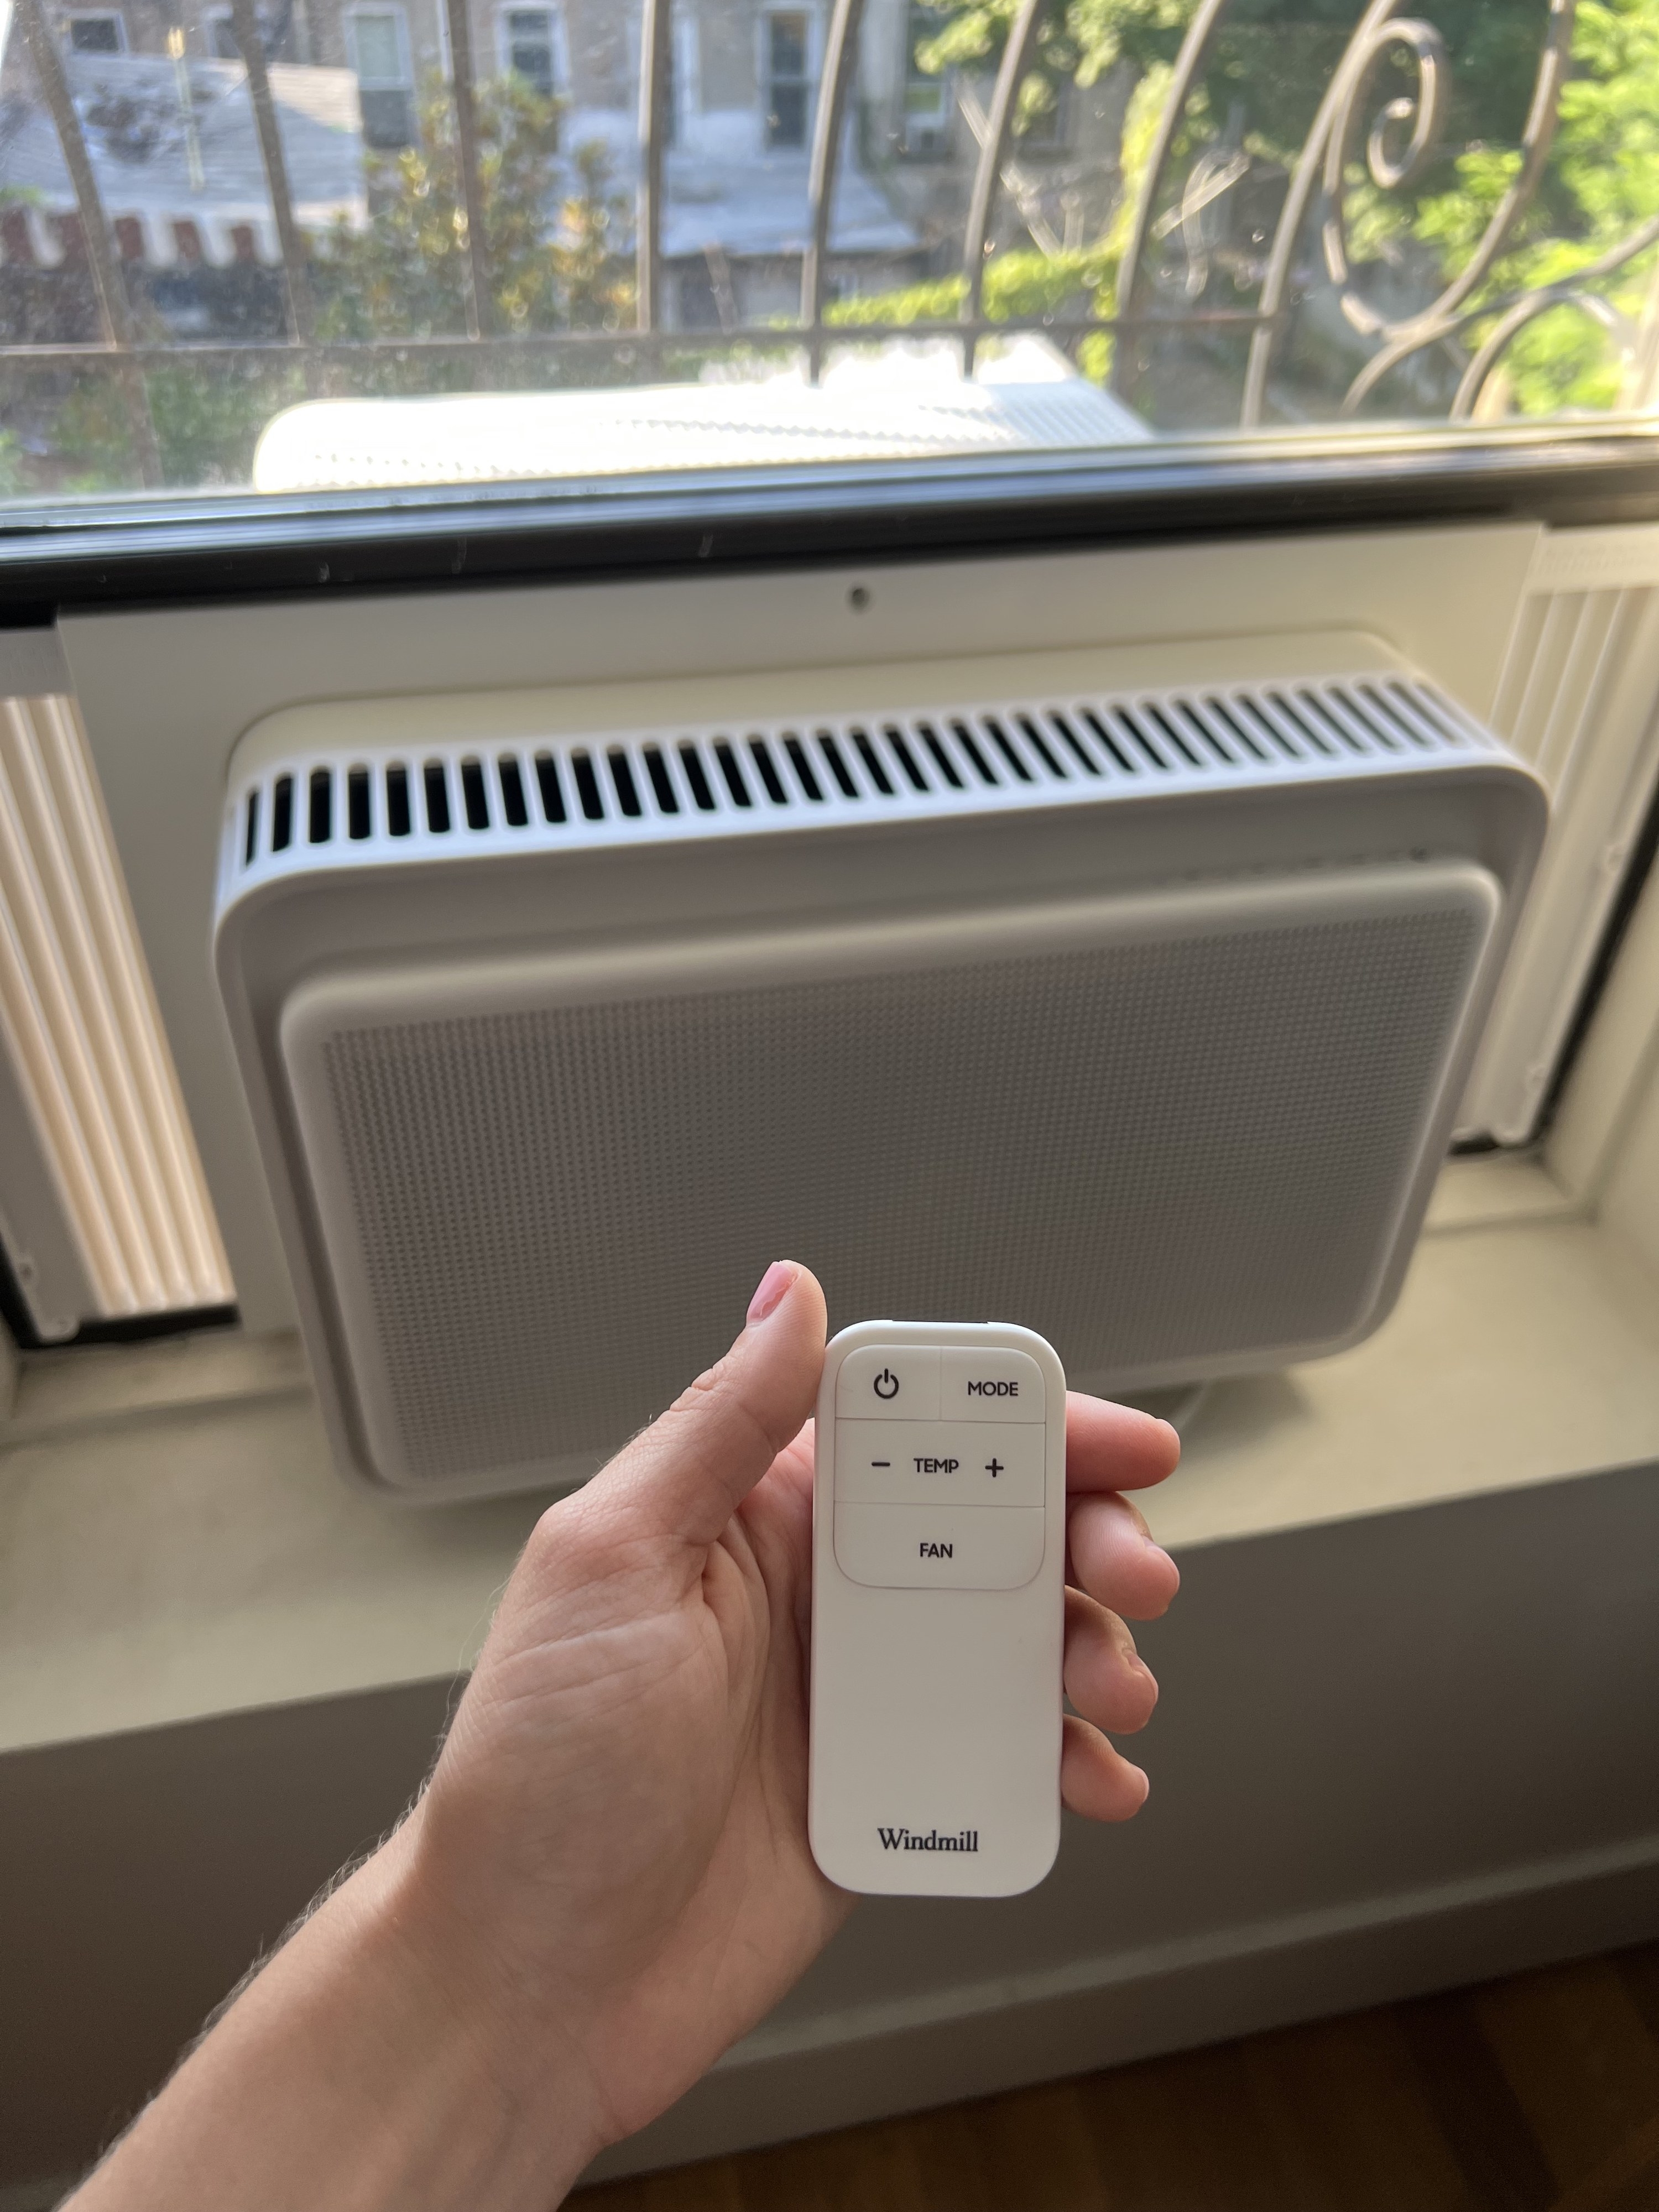 the window unit and a hand holding the remote